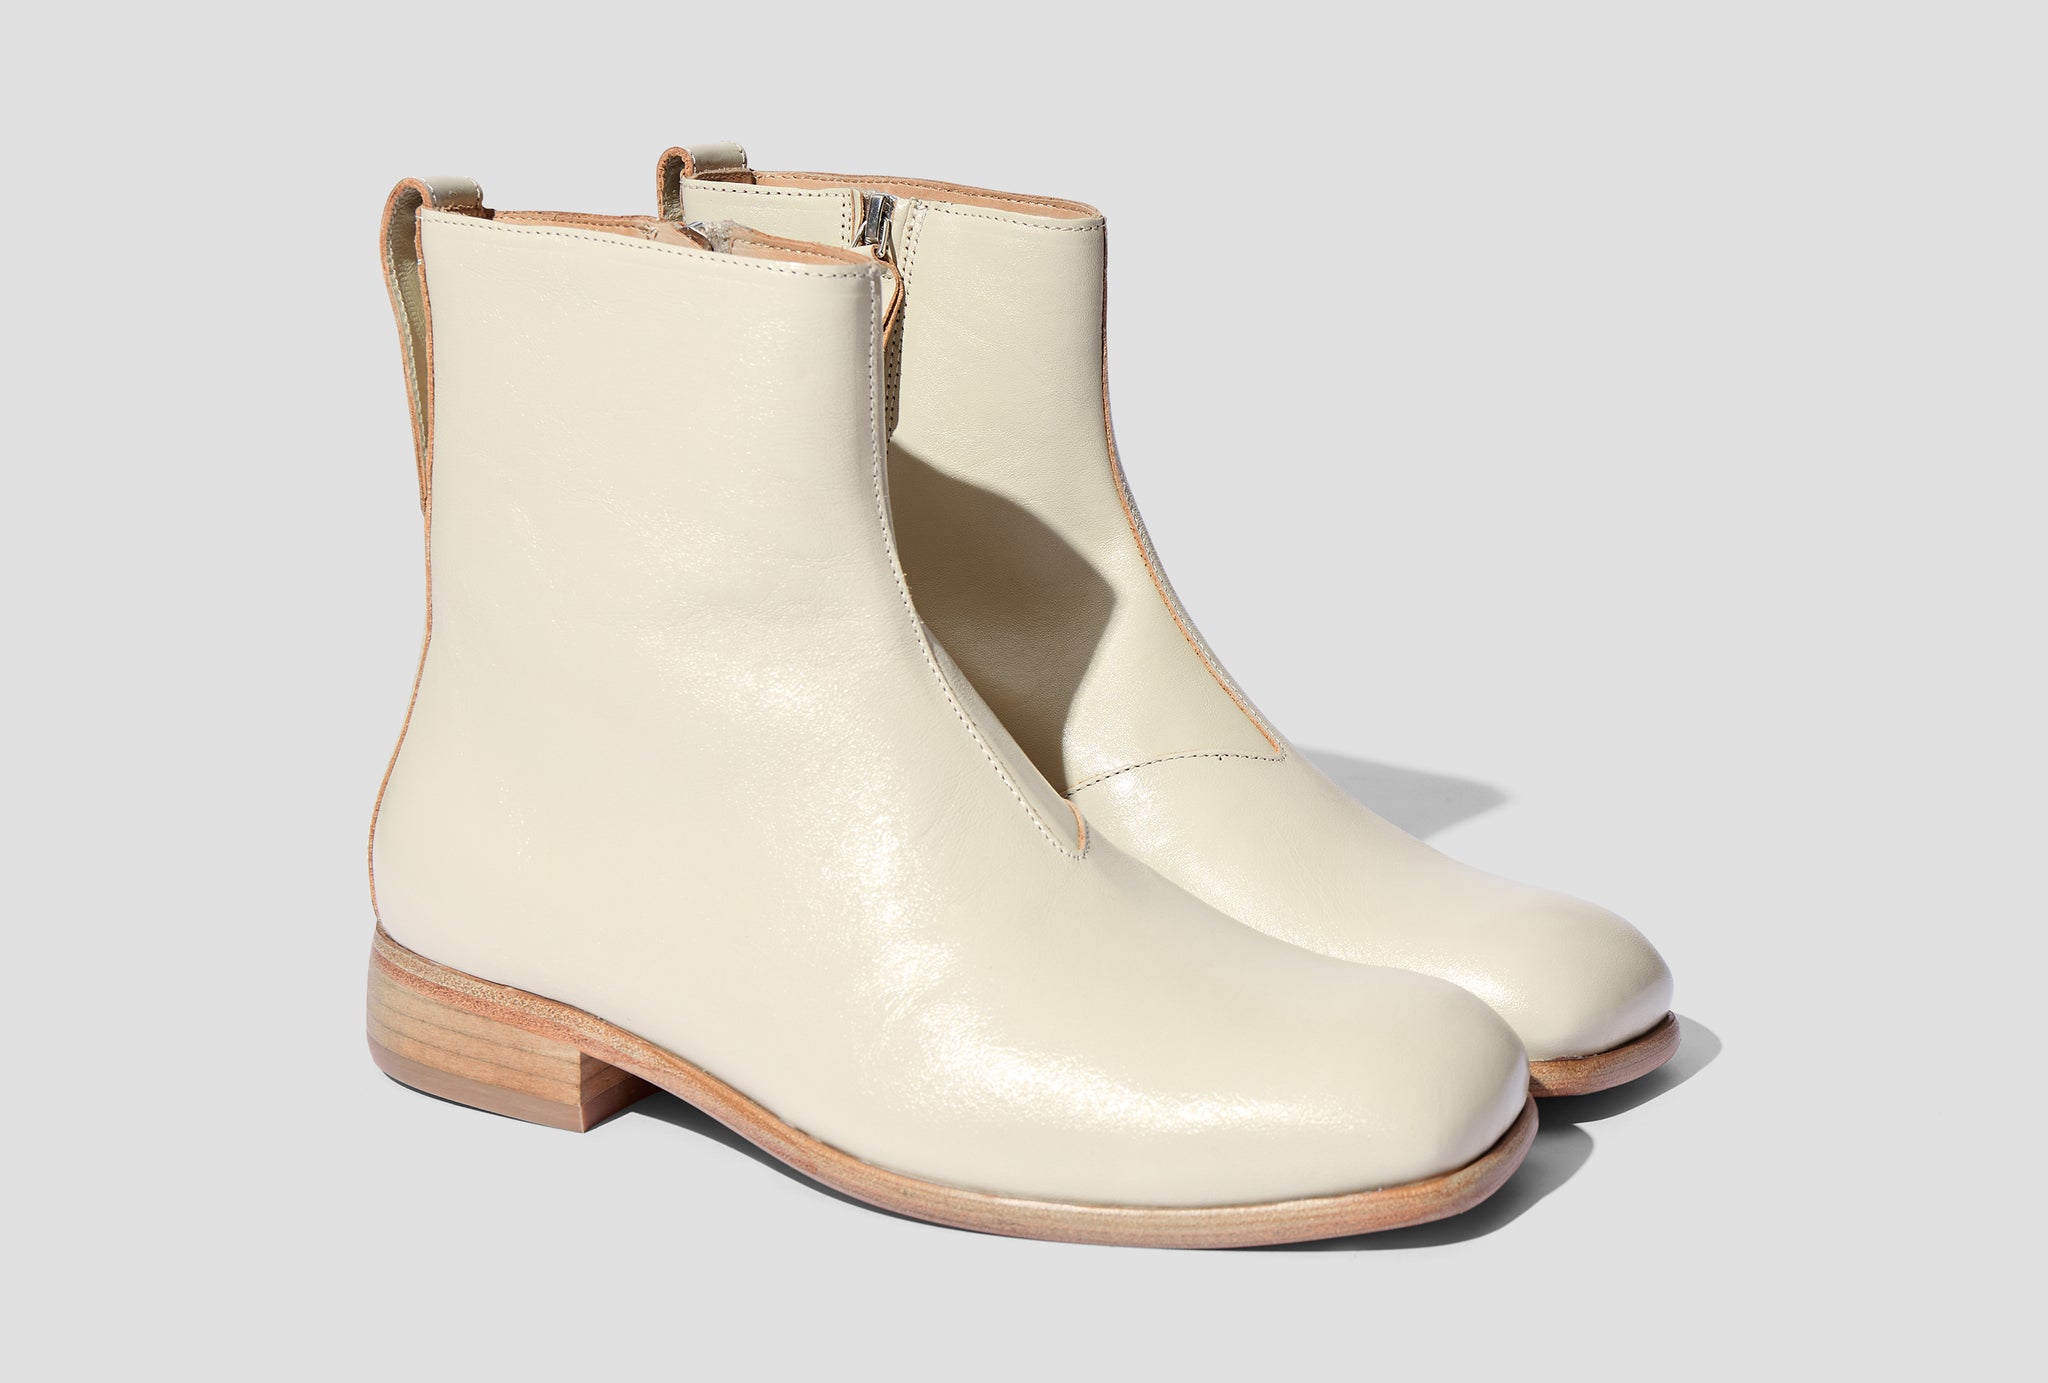 MICHAELIS BOOT - DUSTY WHITE LEATHER A2237MDW Off white